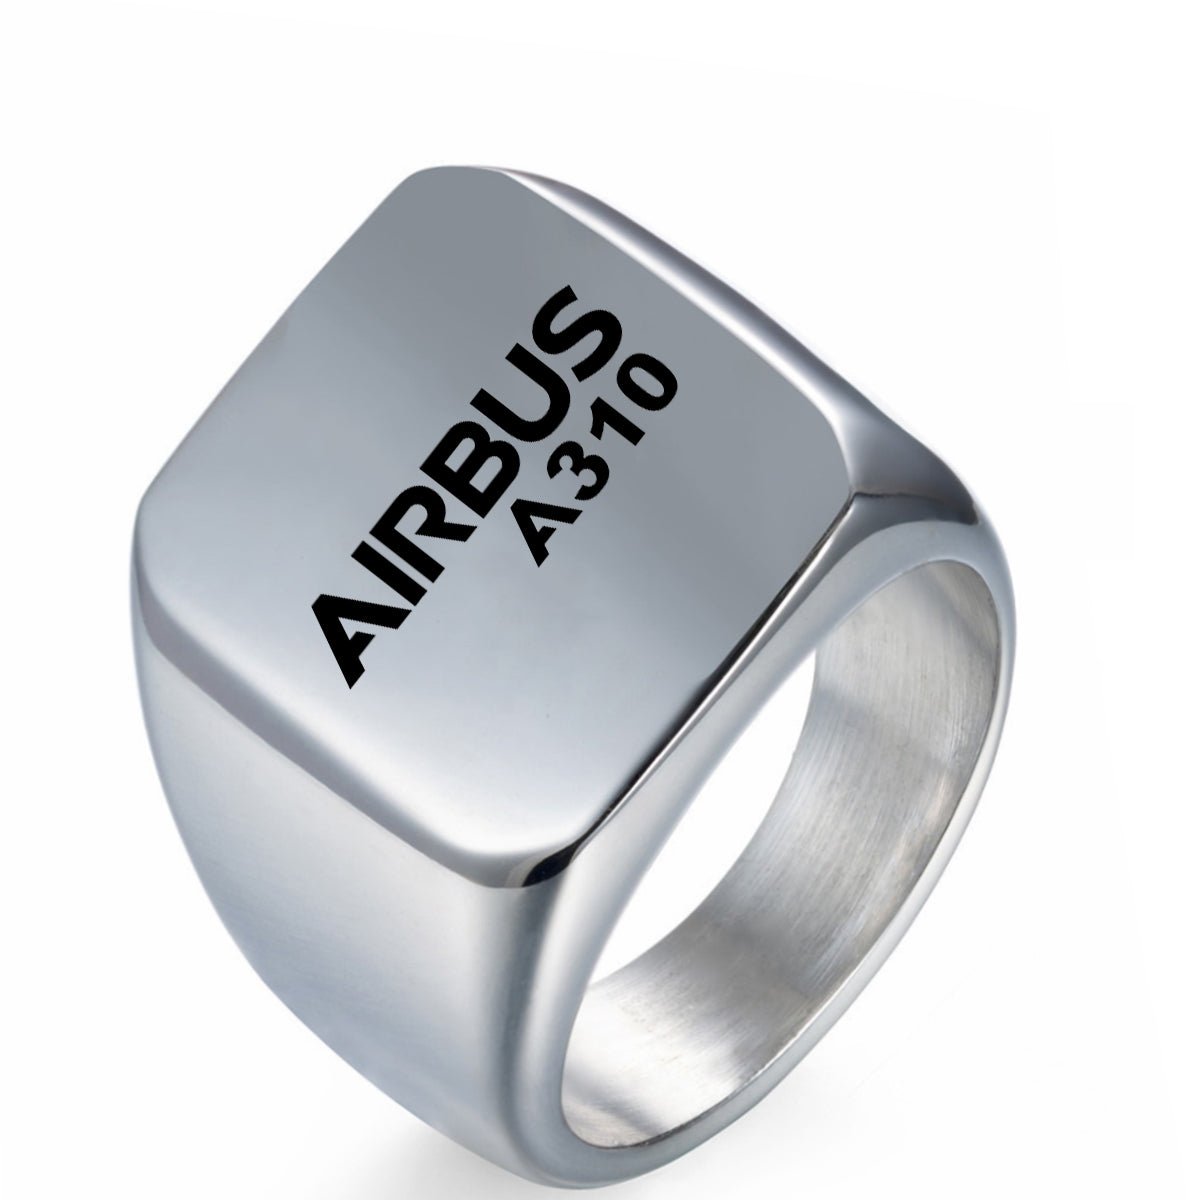 Airbus A310 & Text Designed Men Rings